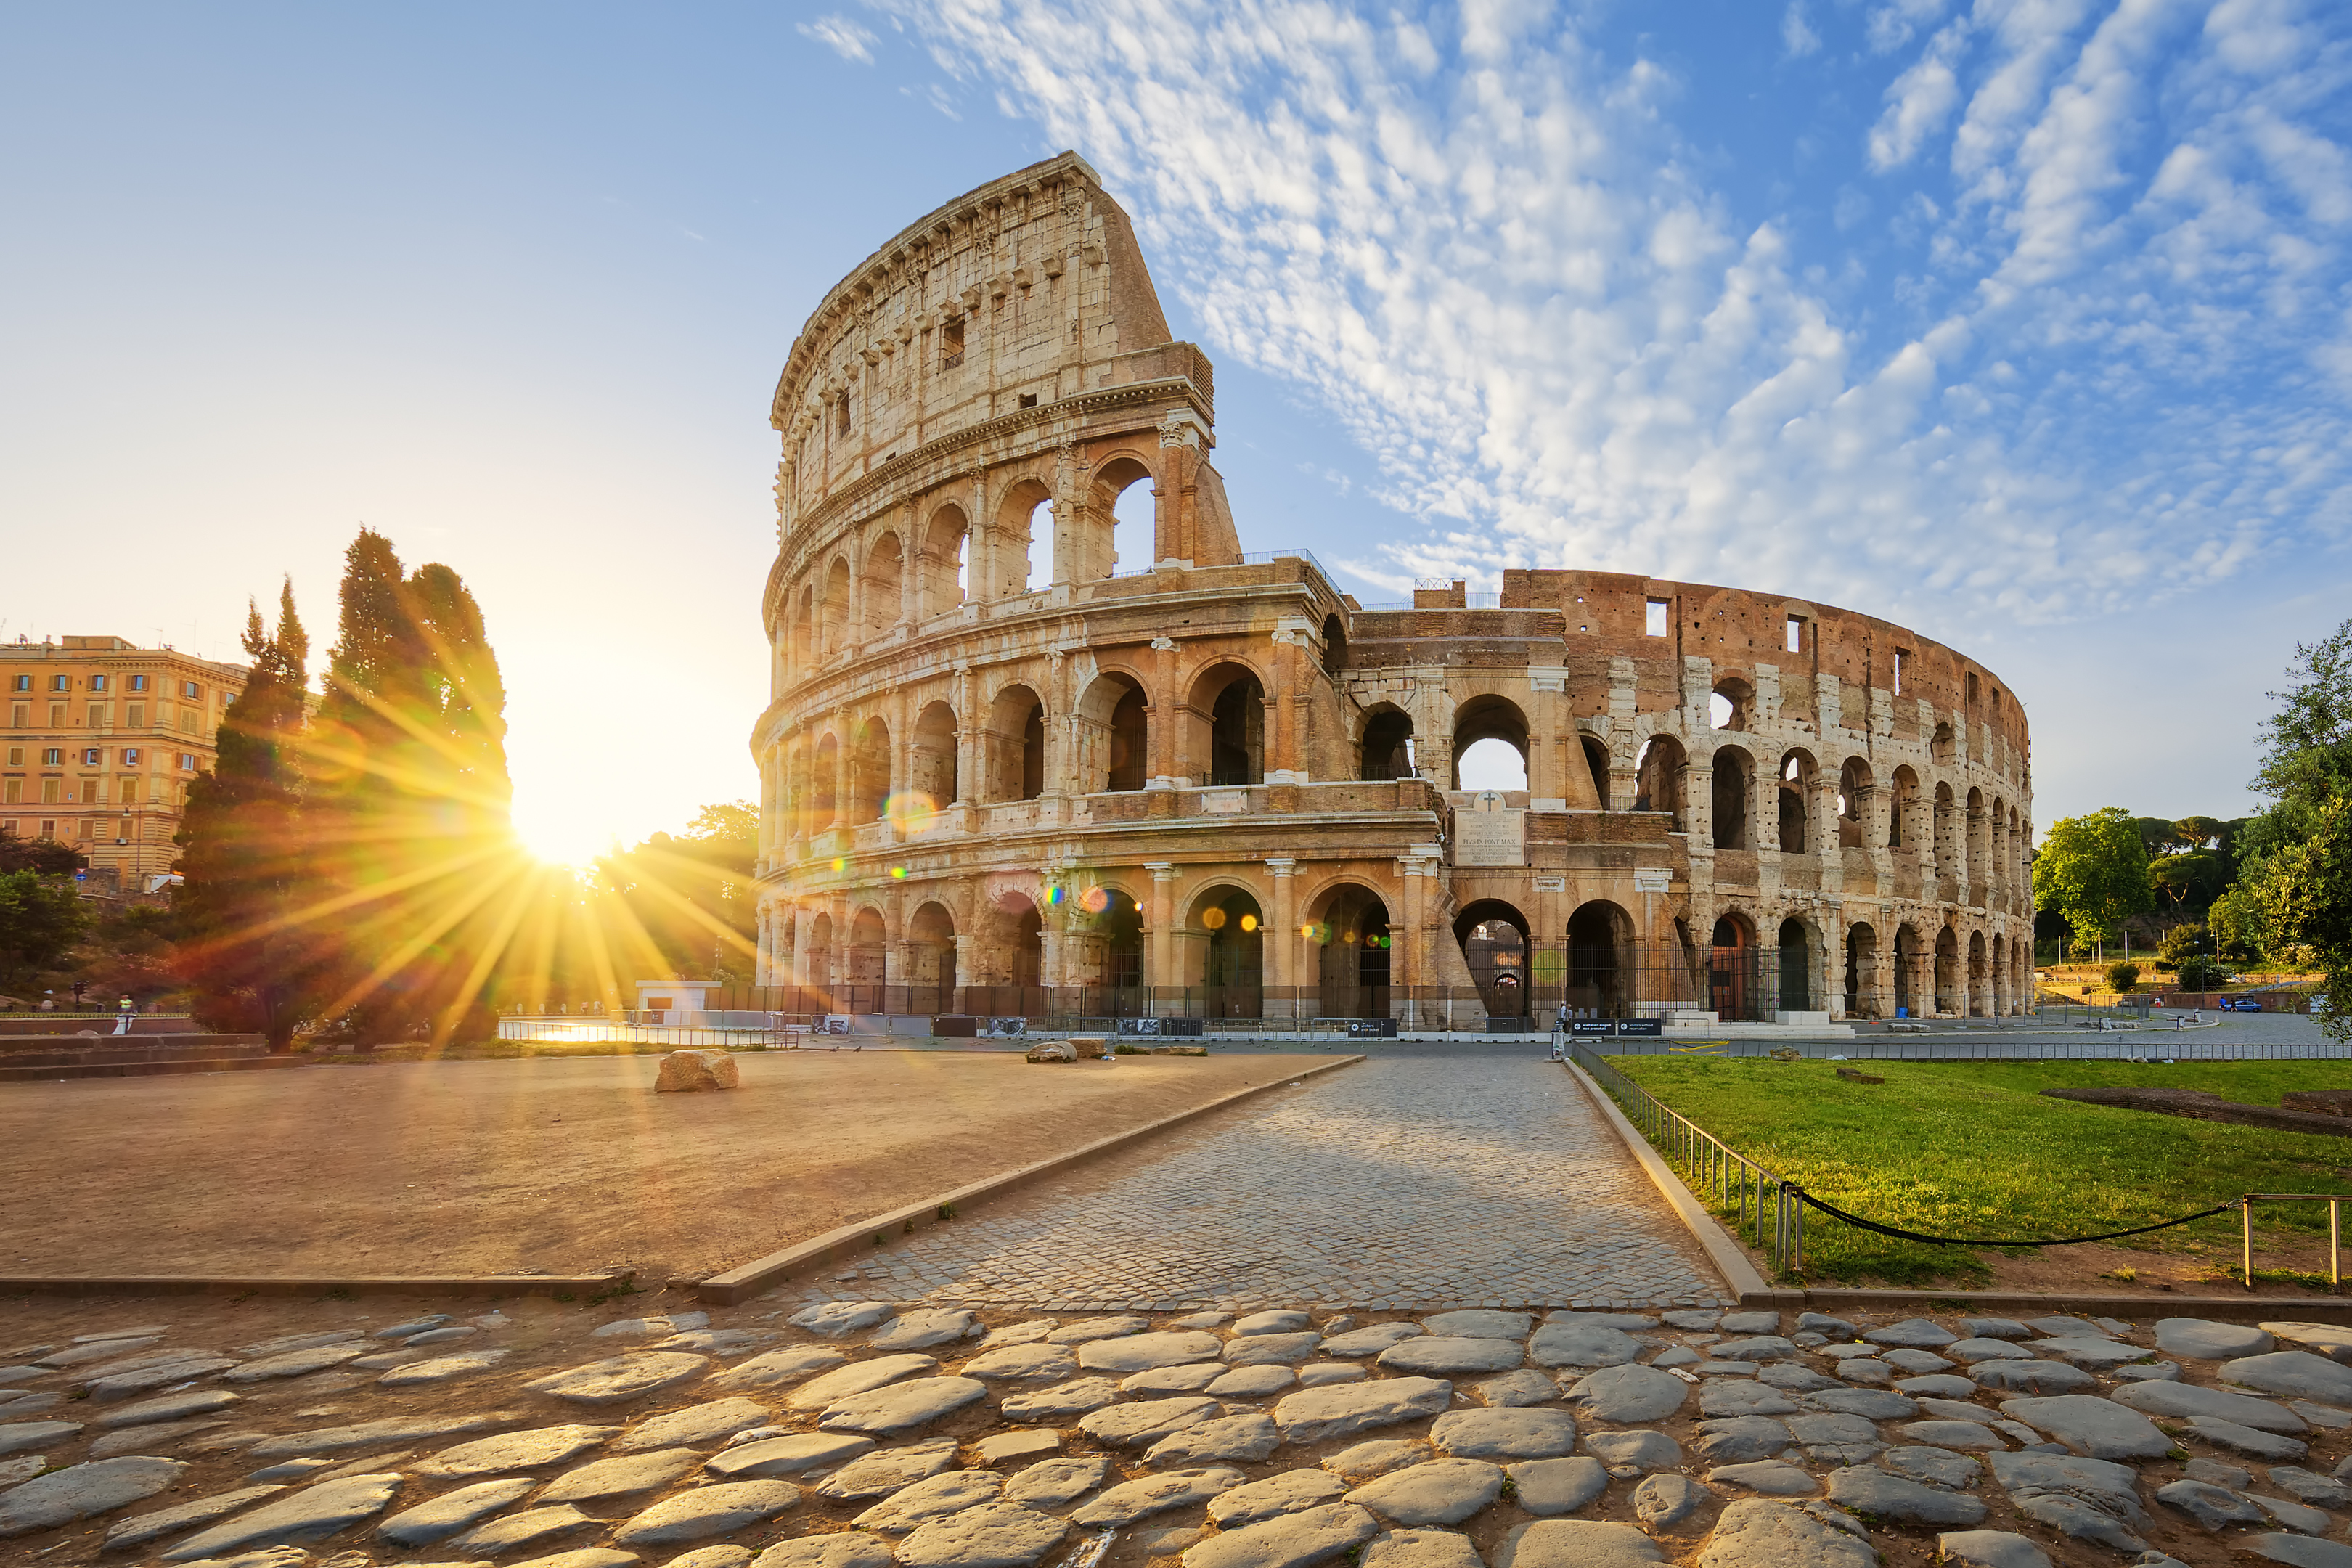 View of Colosseum in Rome (iStock)